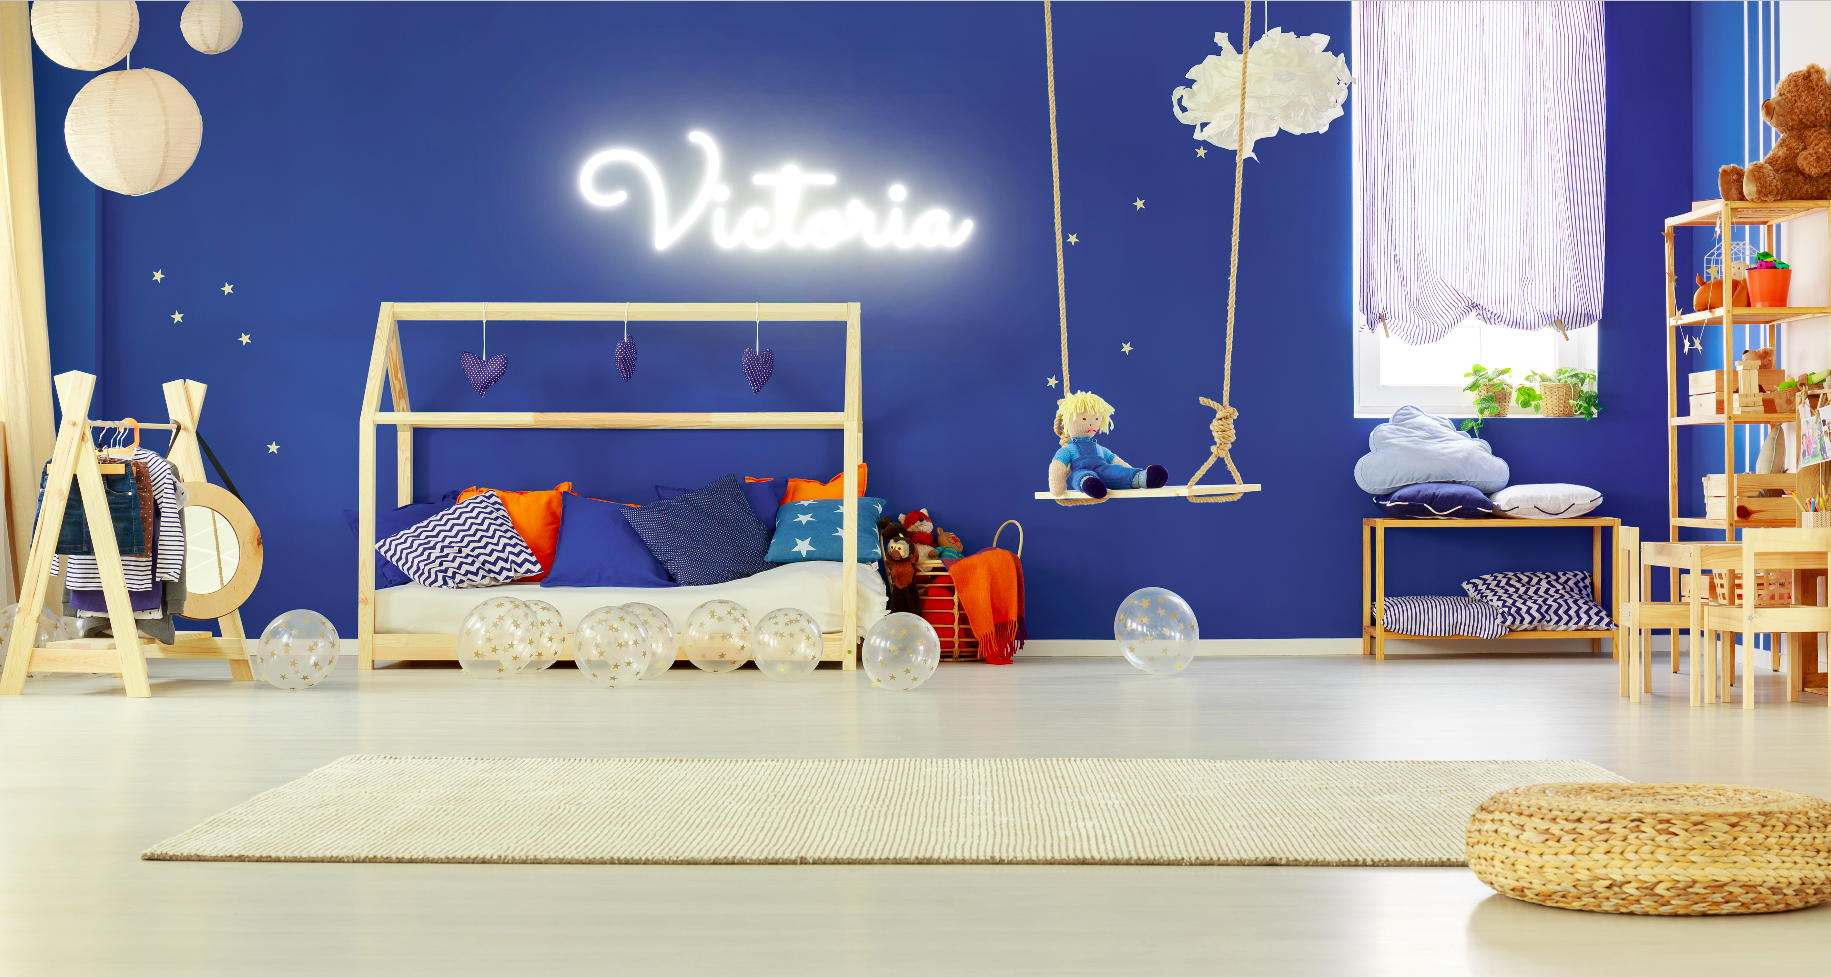 "Victoria" Baby Name LED Neon Sign